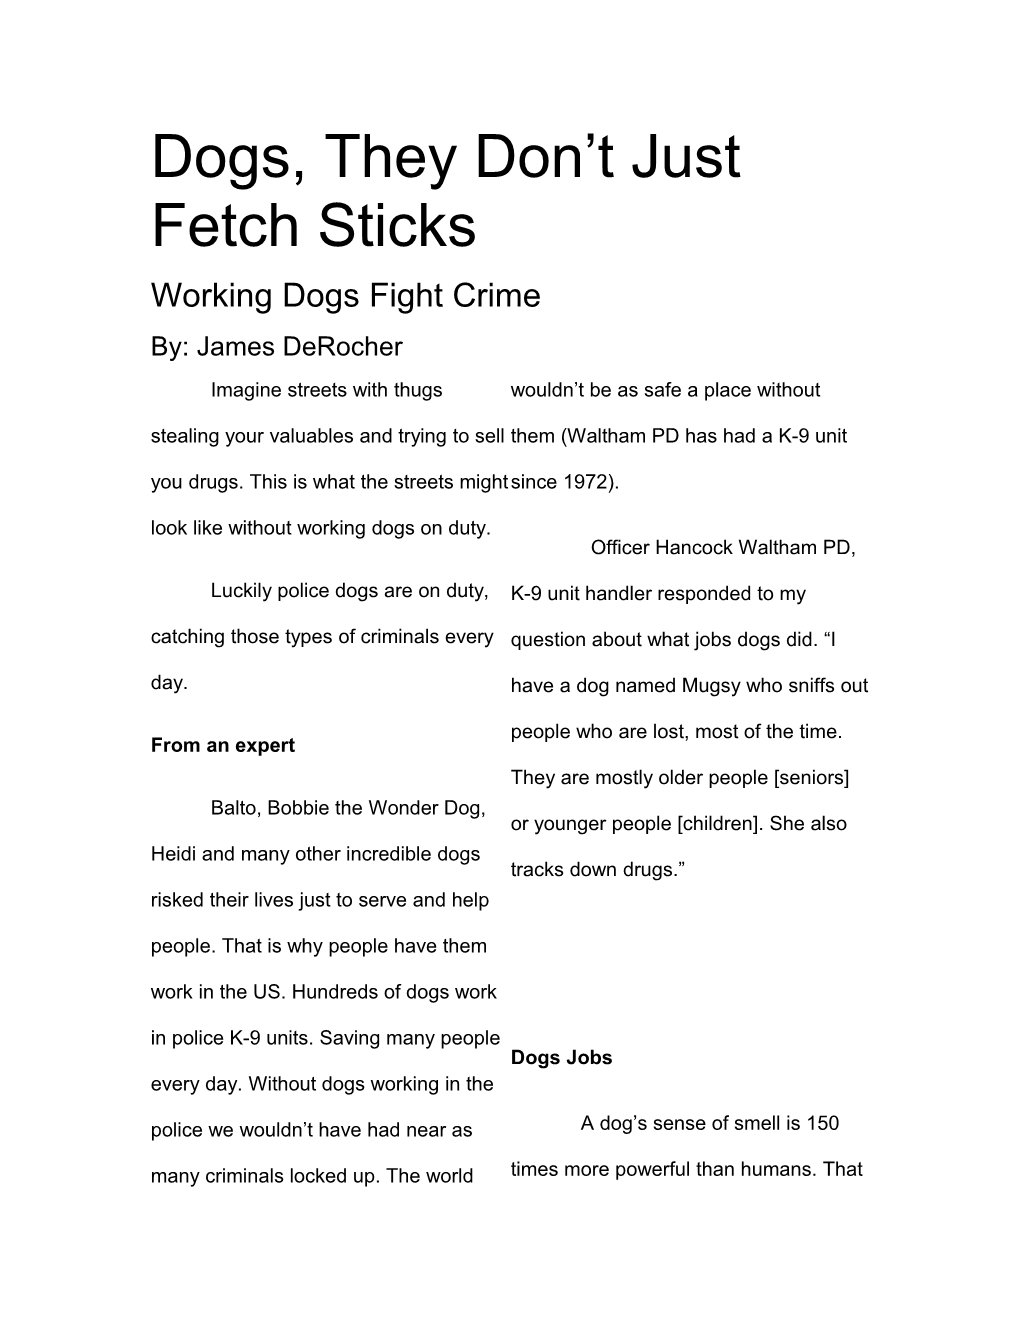 Dogs, They Don T Just Fetch Sticks